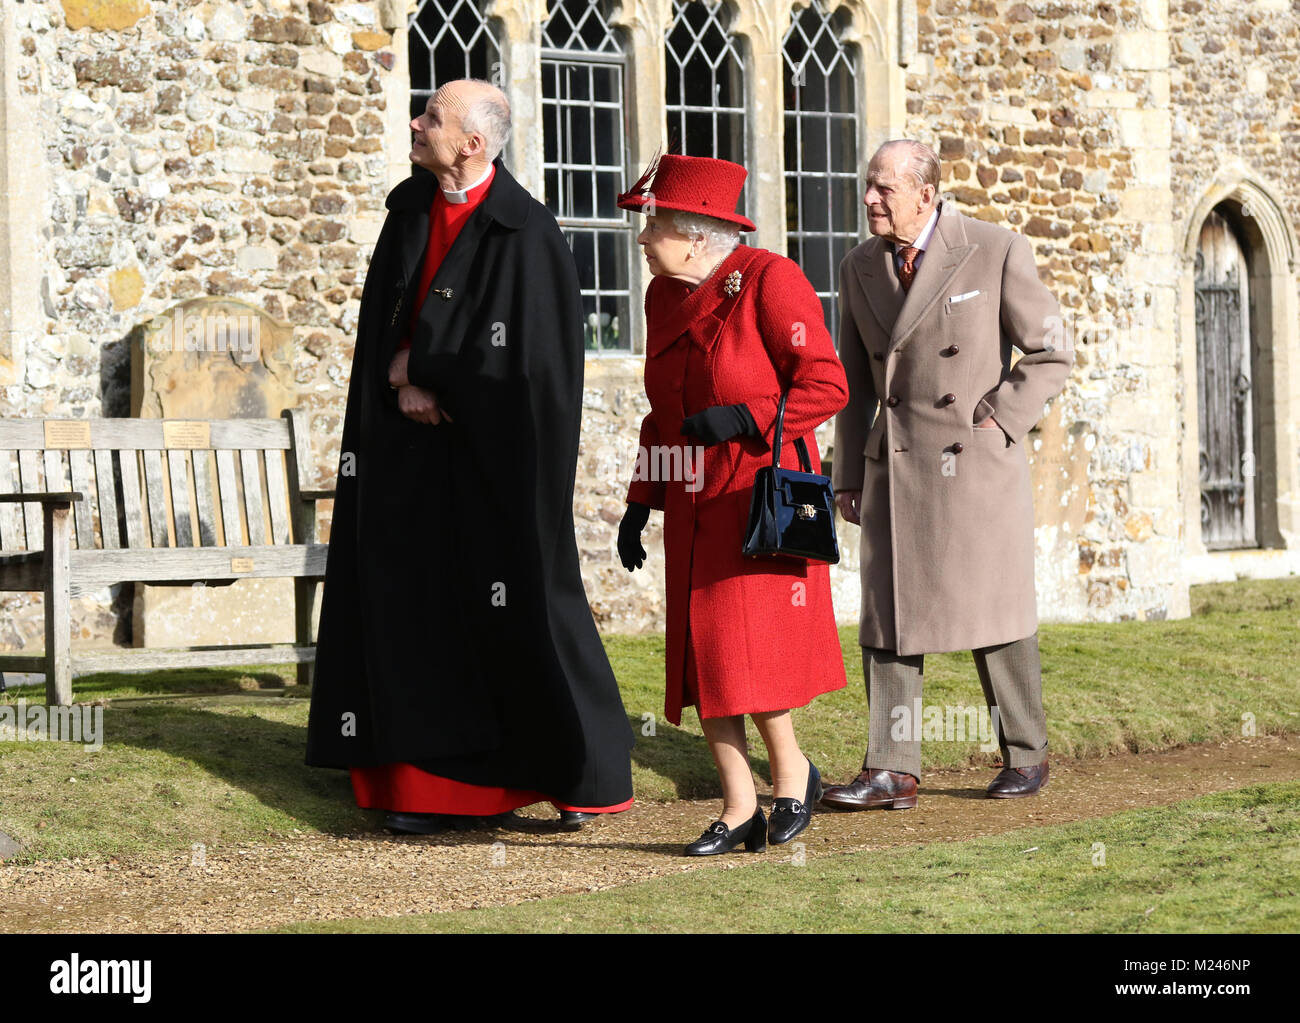 HM Queen Elizabeth II and Prince Philip, Duke of Edinburgh, with Reverend Canon Jonathon Riviere, attending the Sunday morning service at St Peter and St Paul church at West Newton, Norfolk, on February 4, 2018. Credit: Paul Marriott/Alamy Live News Stock Photo